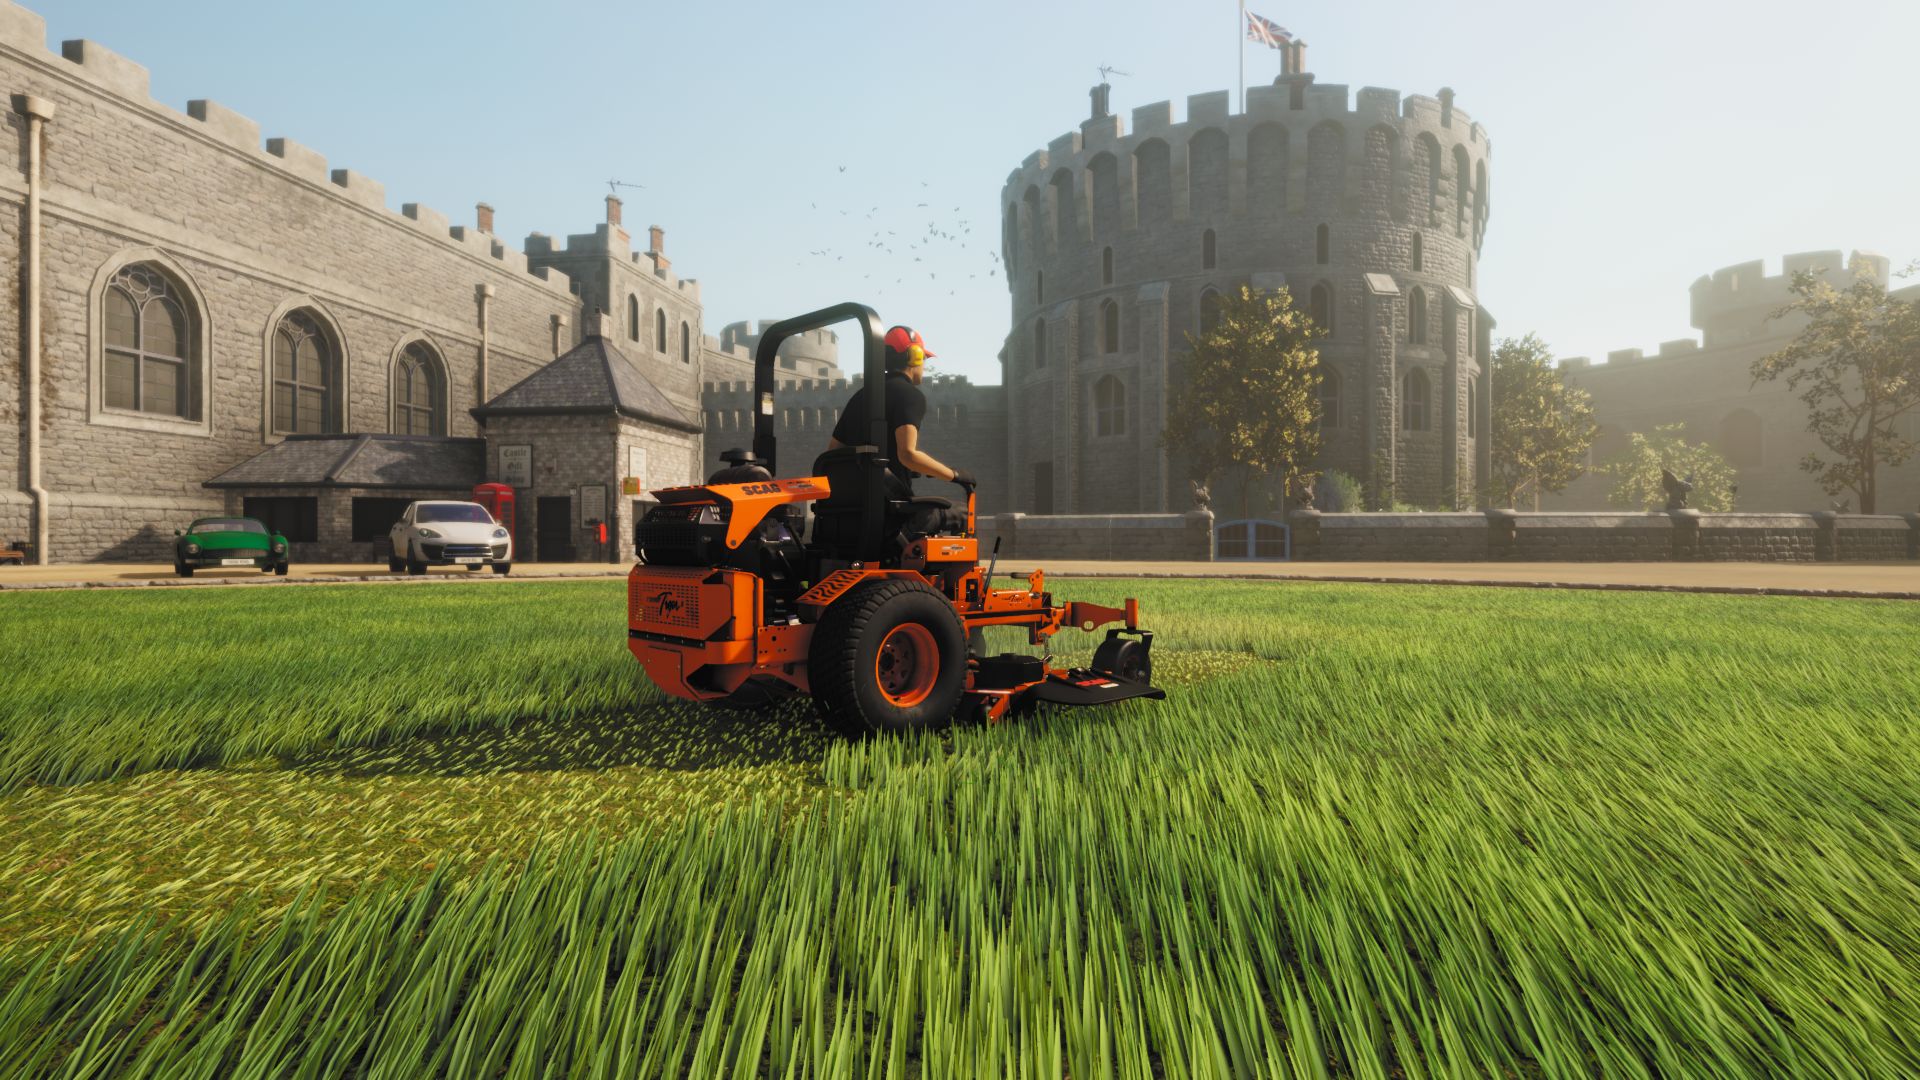 lawn-mowing-simulator-revealed-as-a-new-title-from-skyhook-games-and-curve-digital-xbox-wire